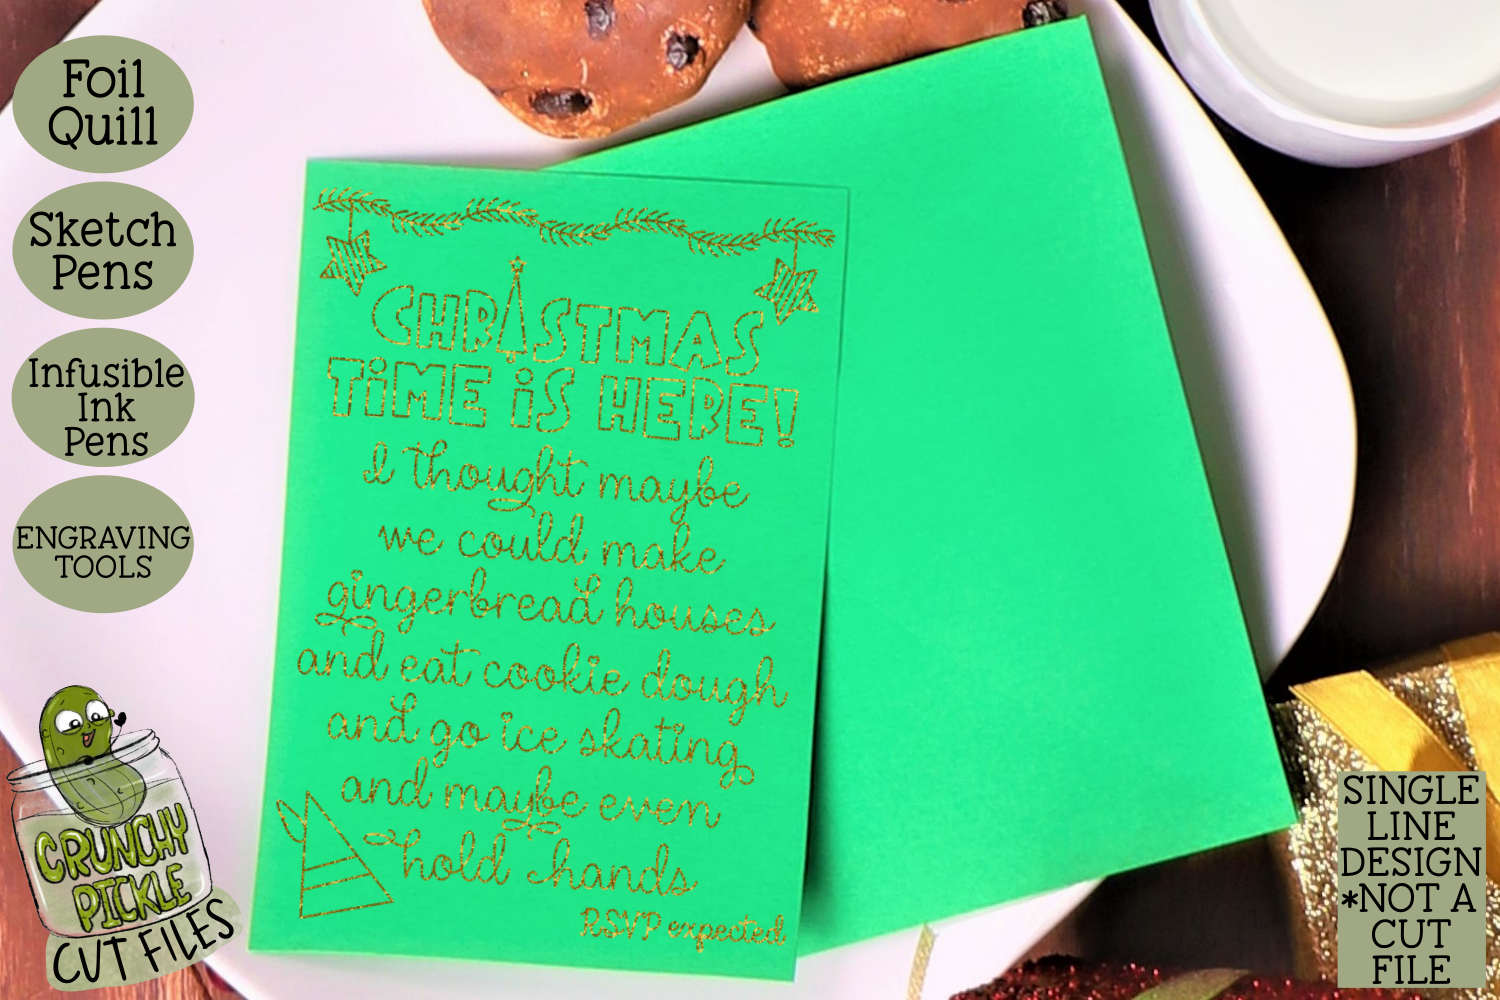 Foil Quill Christmas Card Elf Invitation By Crunchy Pickle Thehungryjpeg Com